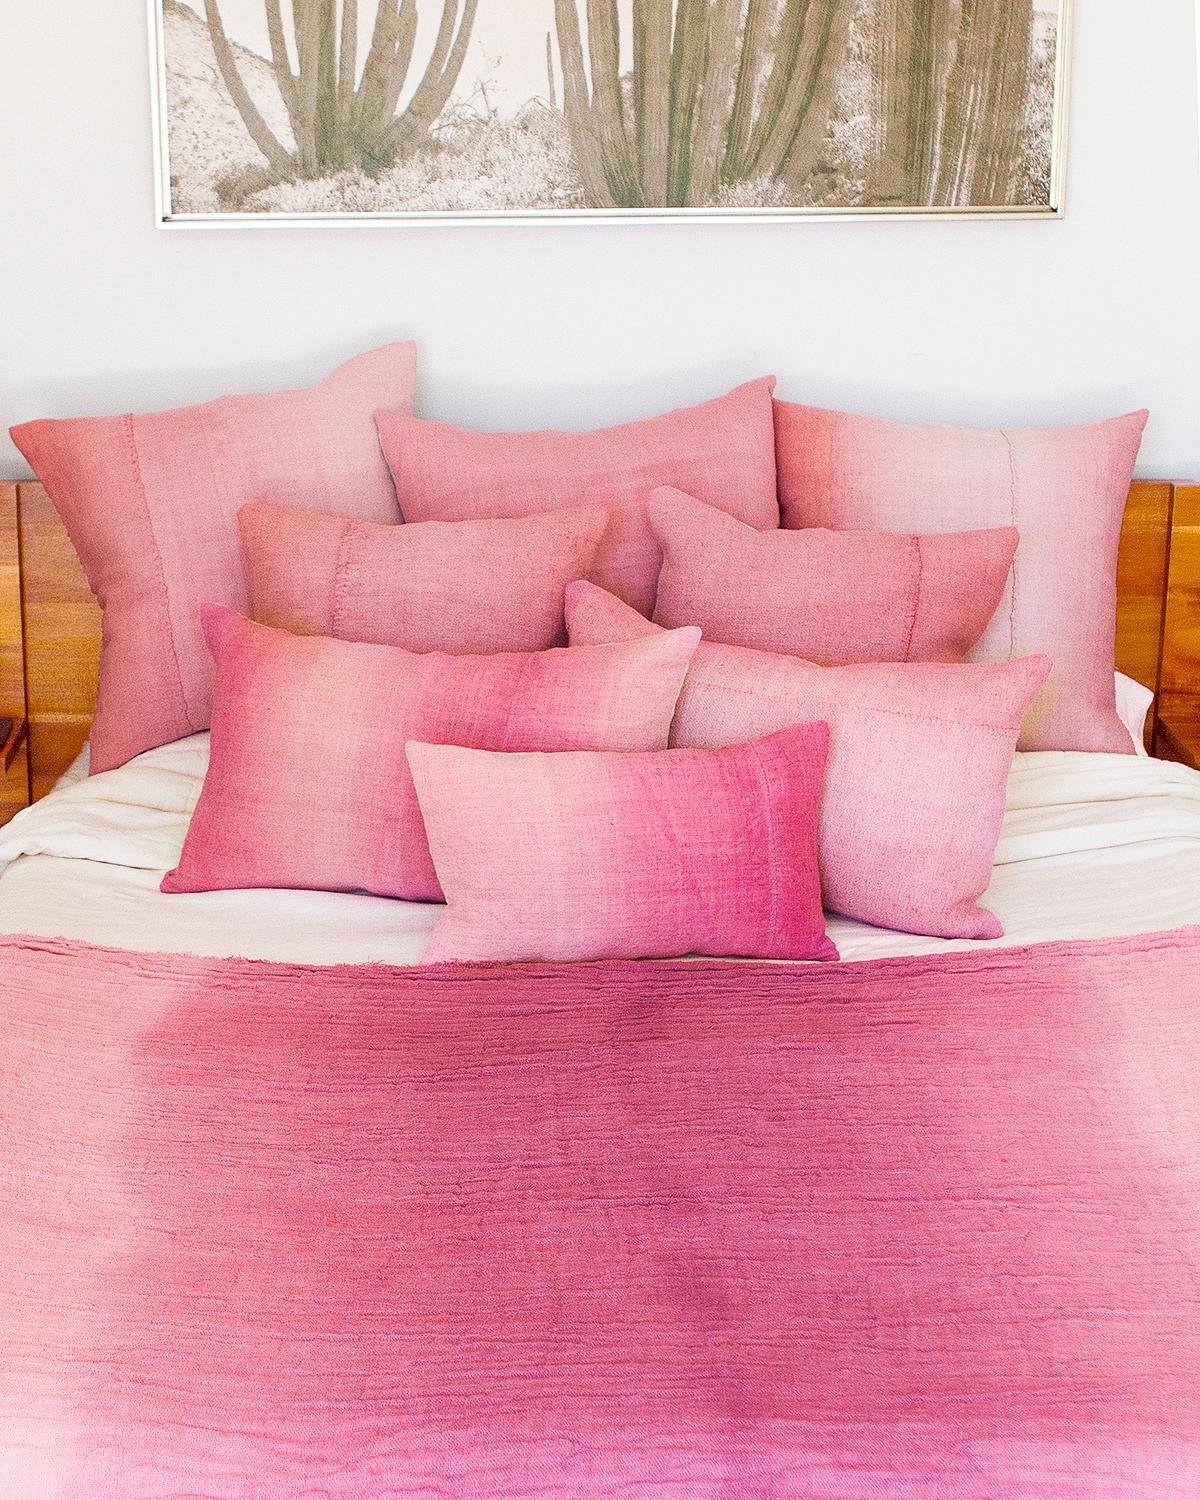 These handmade pink ombre cushions are the perfect pop of color to brighten up your space. Hand made from natural materials like vintage linen, they are sure to make your living room or bedroom feel more modern while adding a rustic charm. With